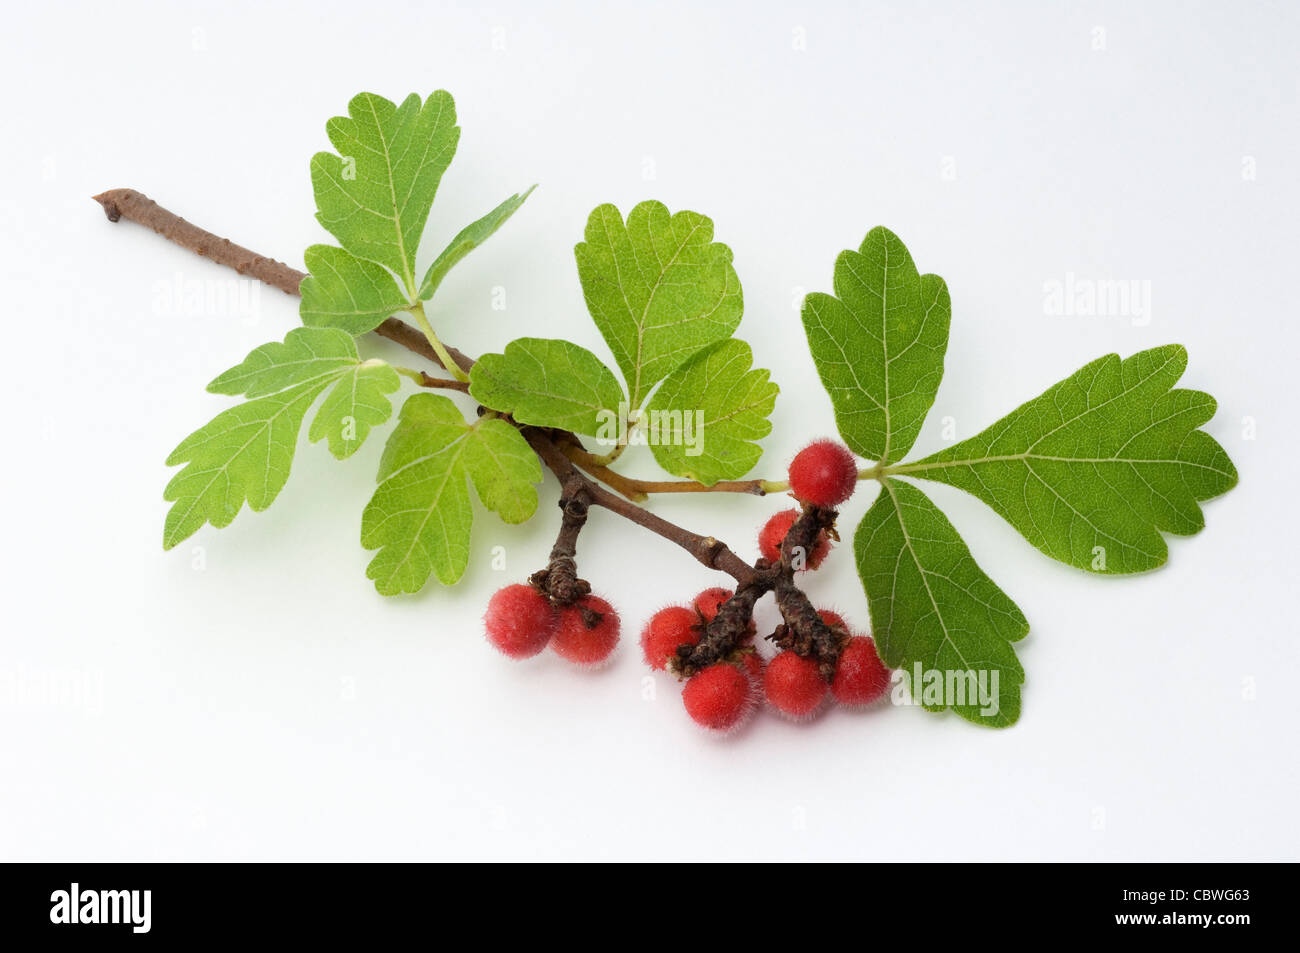 Fragrant Sumac (Rhus aromatica). Twig with fruit. Studio picture against a white background Stock Photo